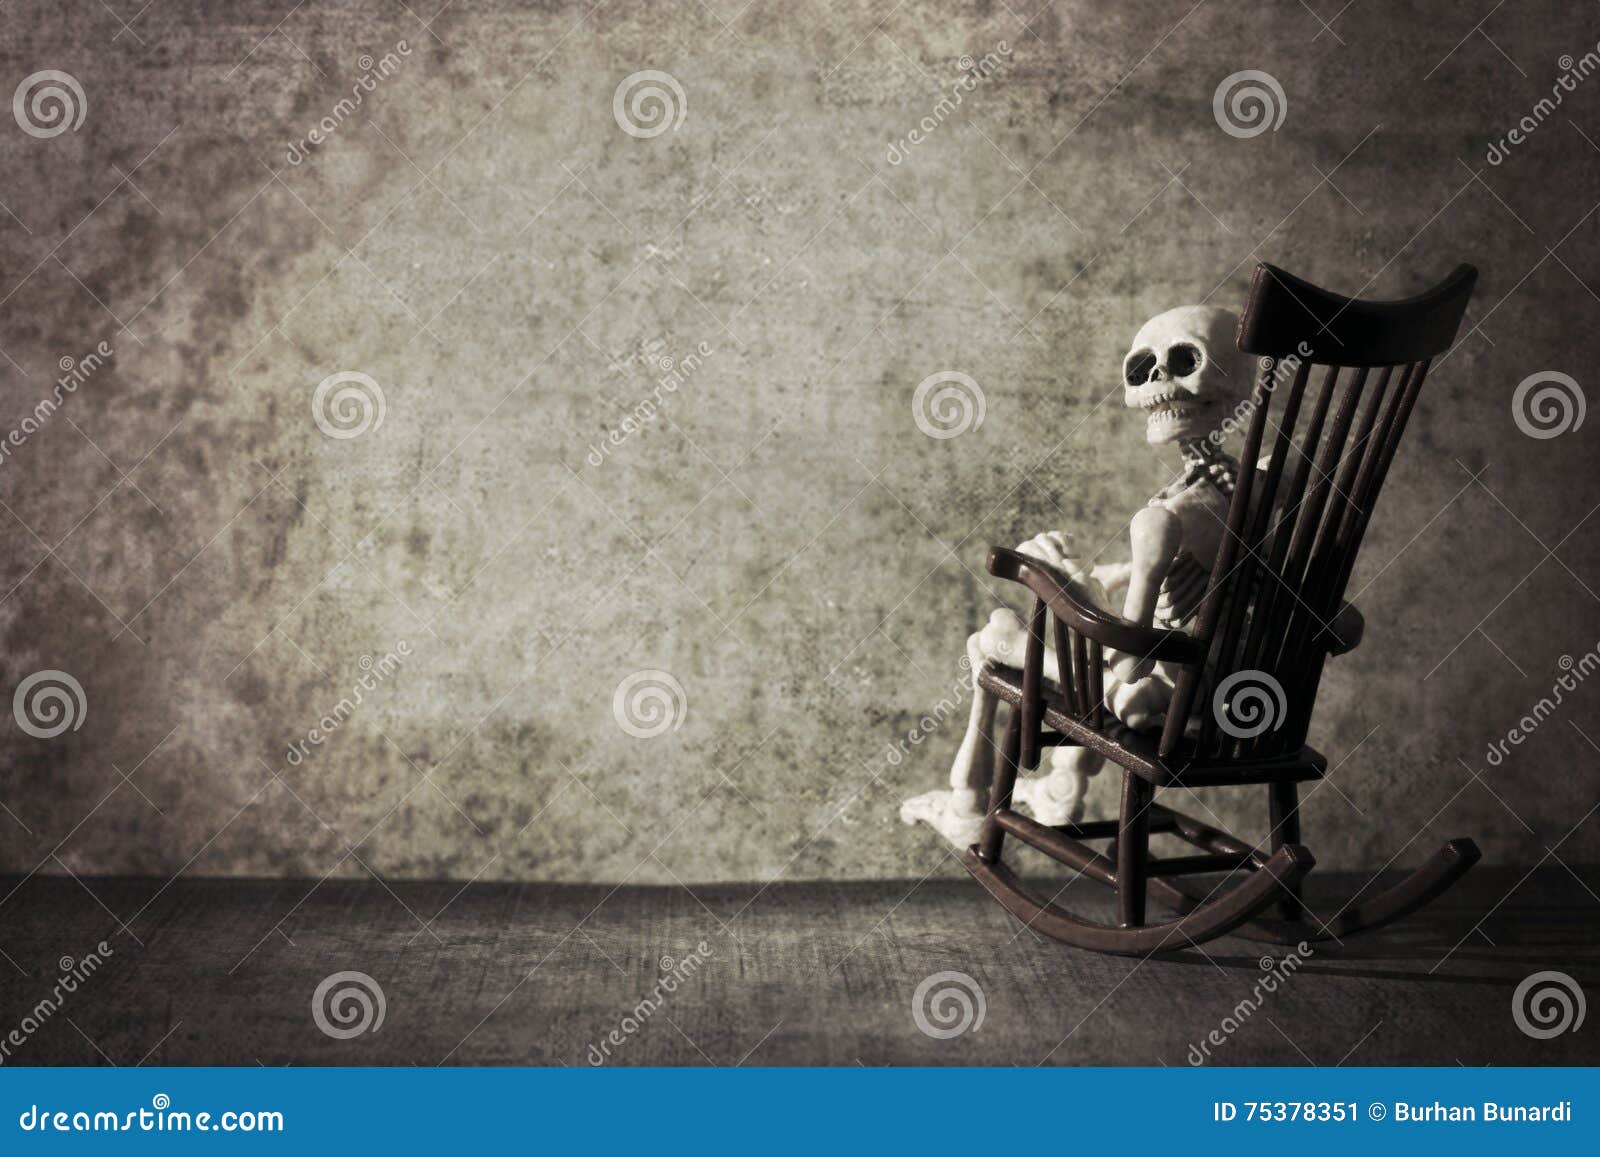 350 Skeleton Chair Photos Free Royalty Free Stock Photos From Dreamstime